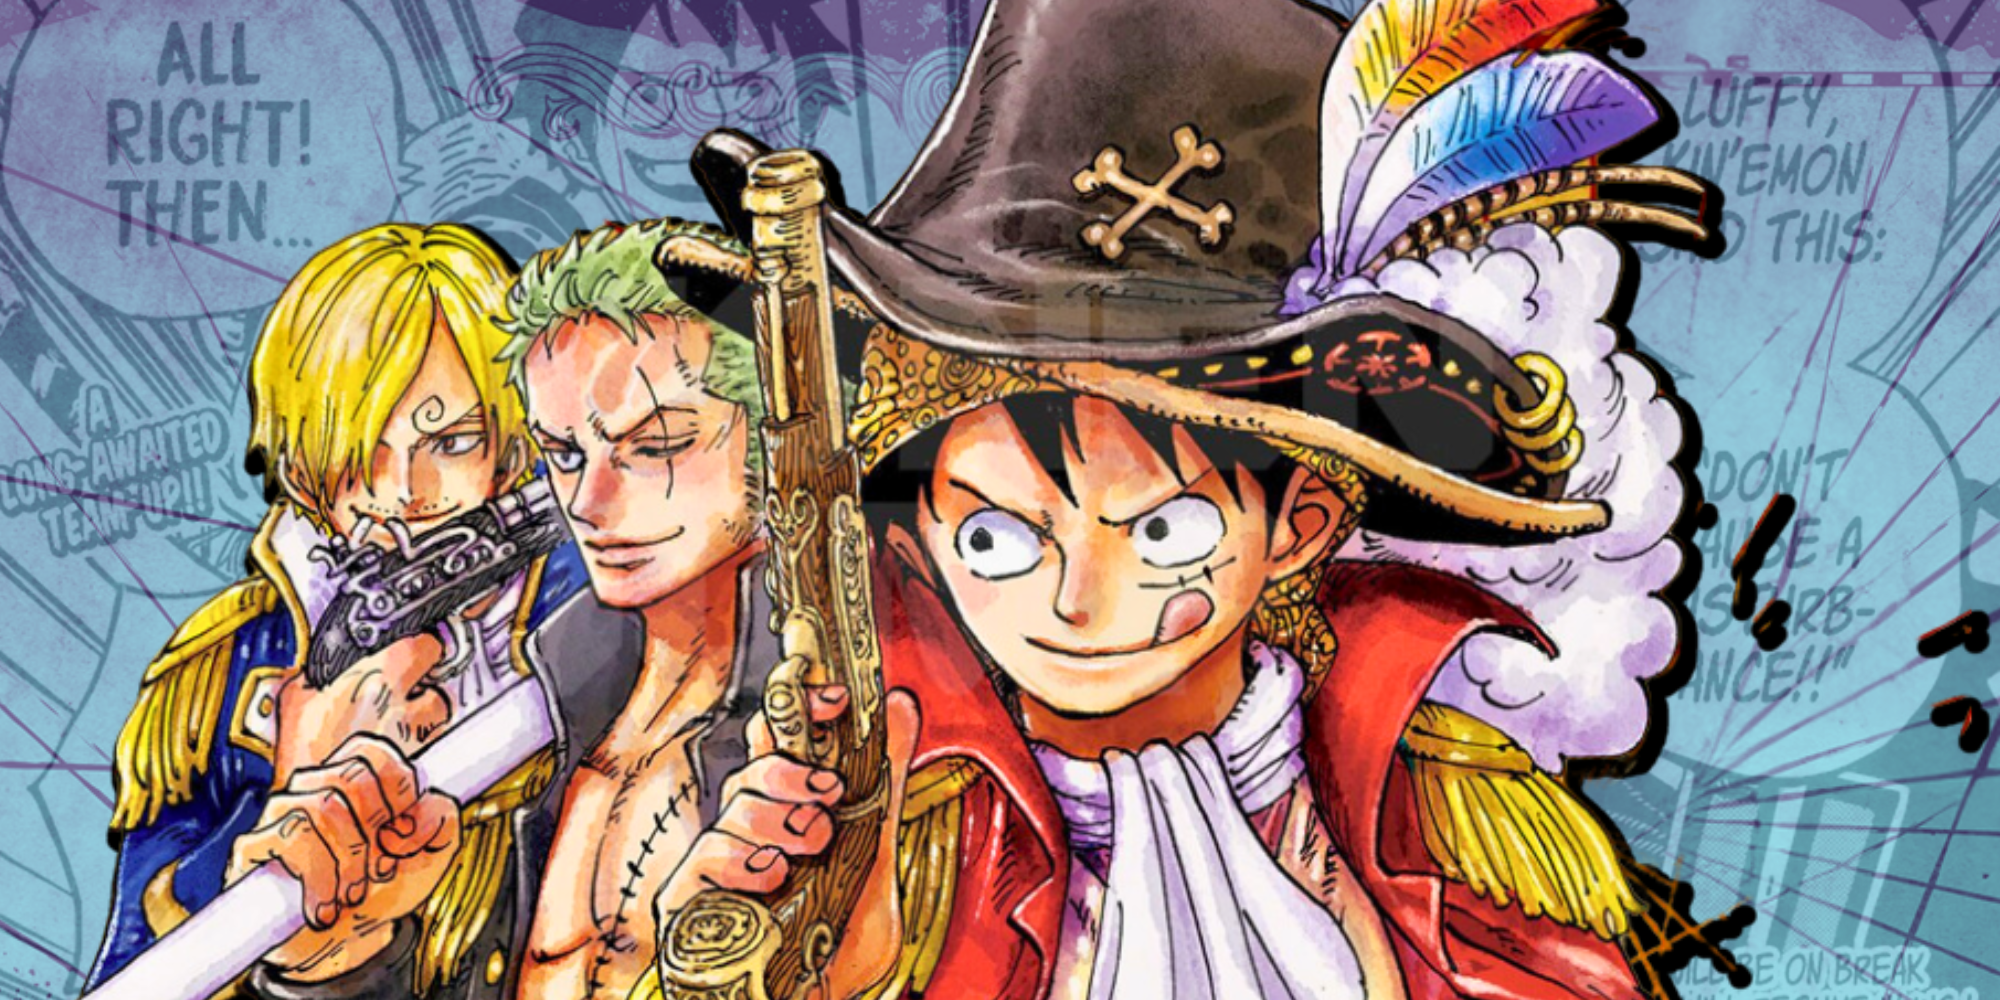 Custom Image of Wano, Zorro, and Luffy from One Piece dressed in traditional pirate attire holding weapons